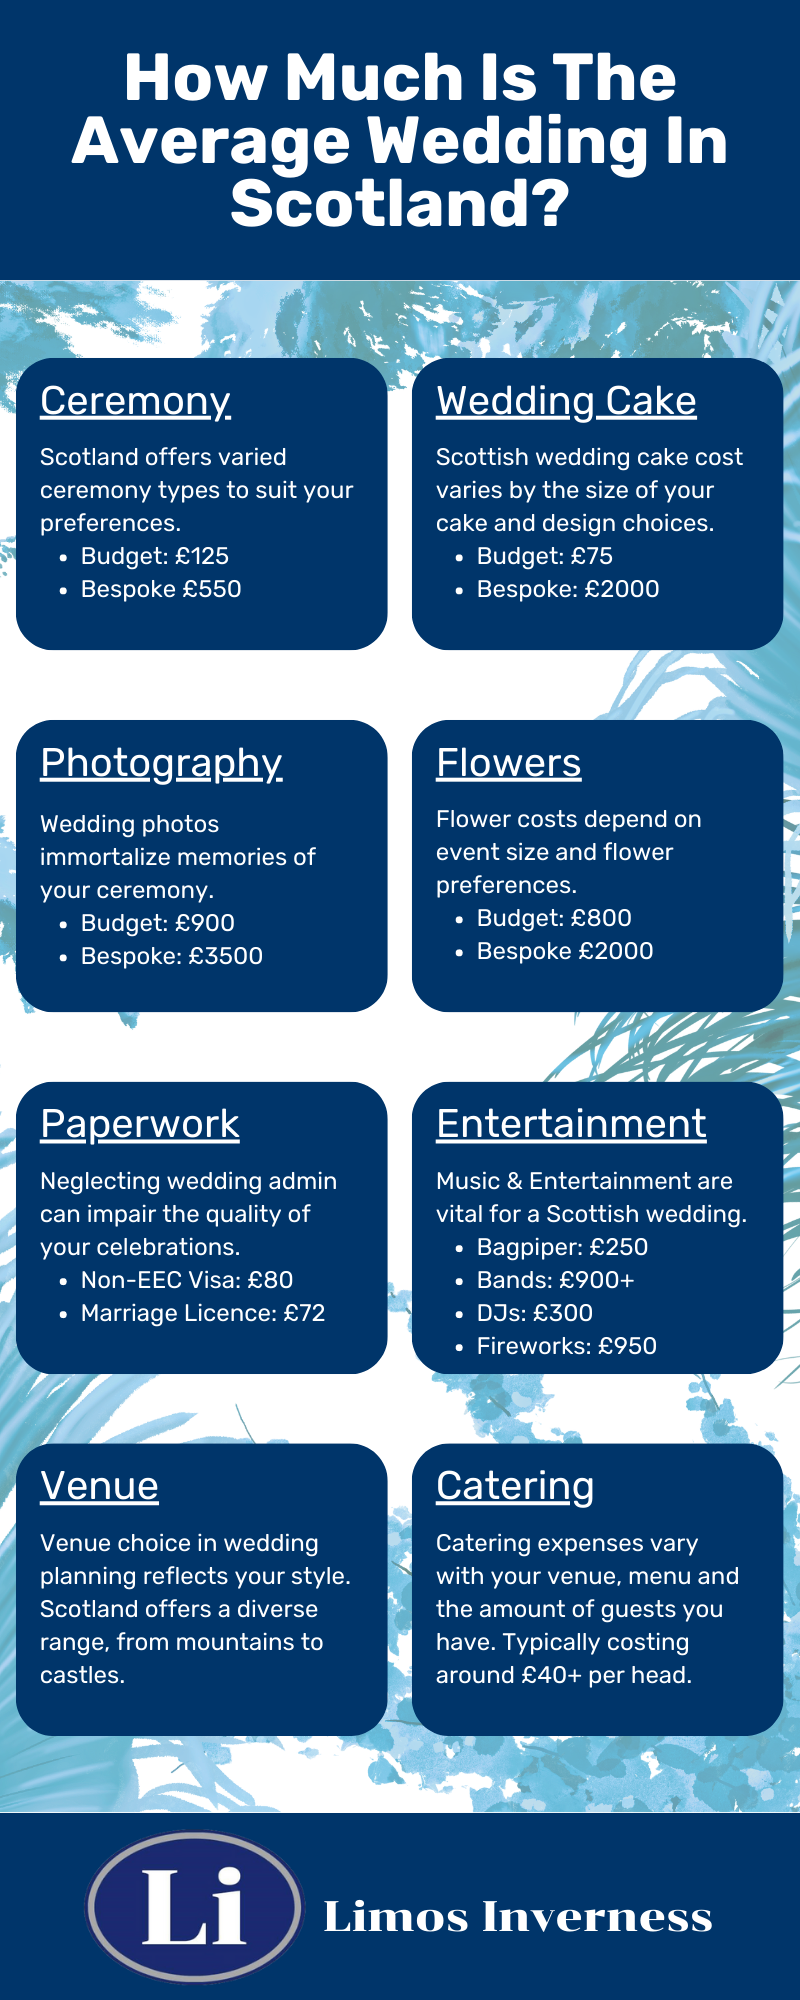 How Much Is The Average Wedding In Scotland?